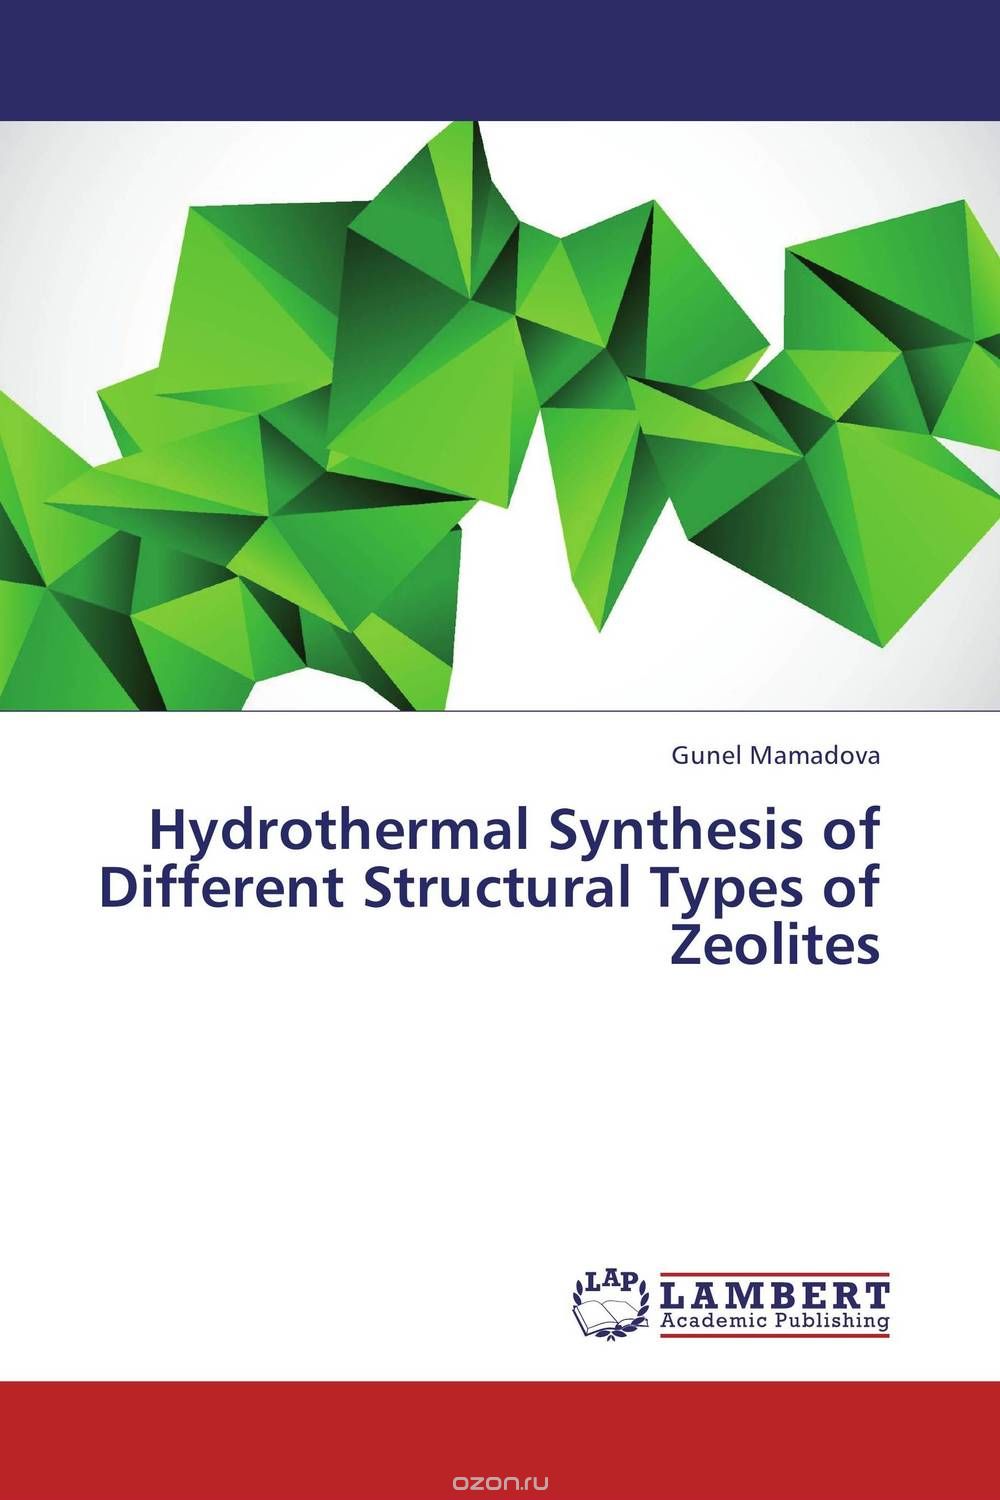 Hydrothermal Synthesis of Different Structural Types of Zeolites